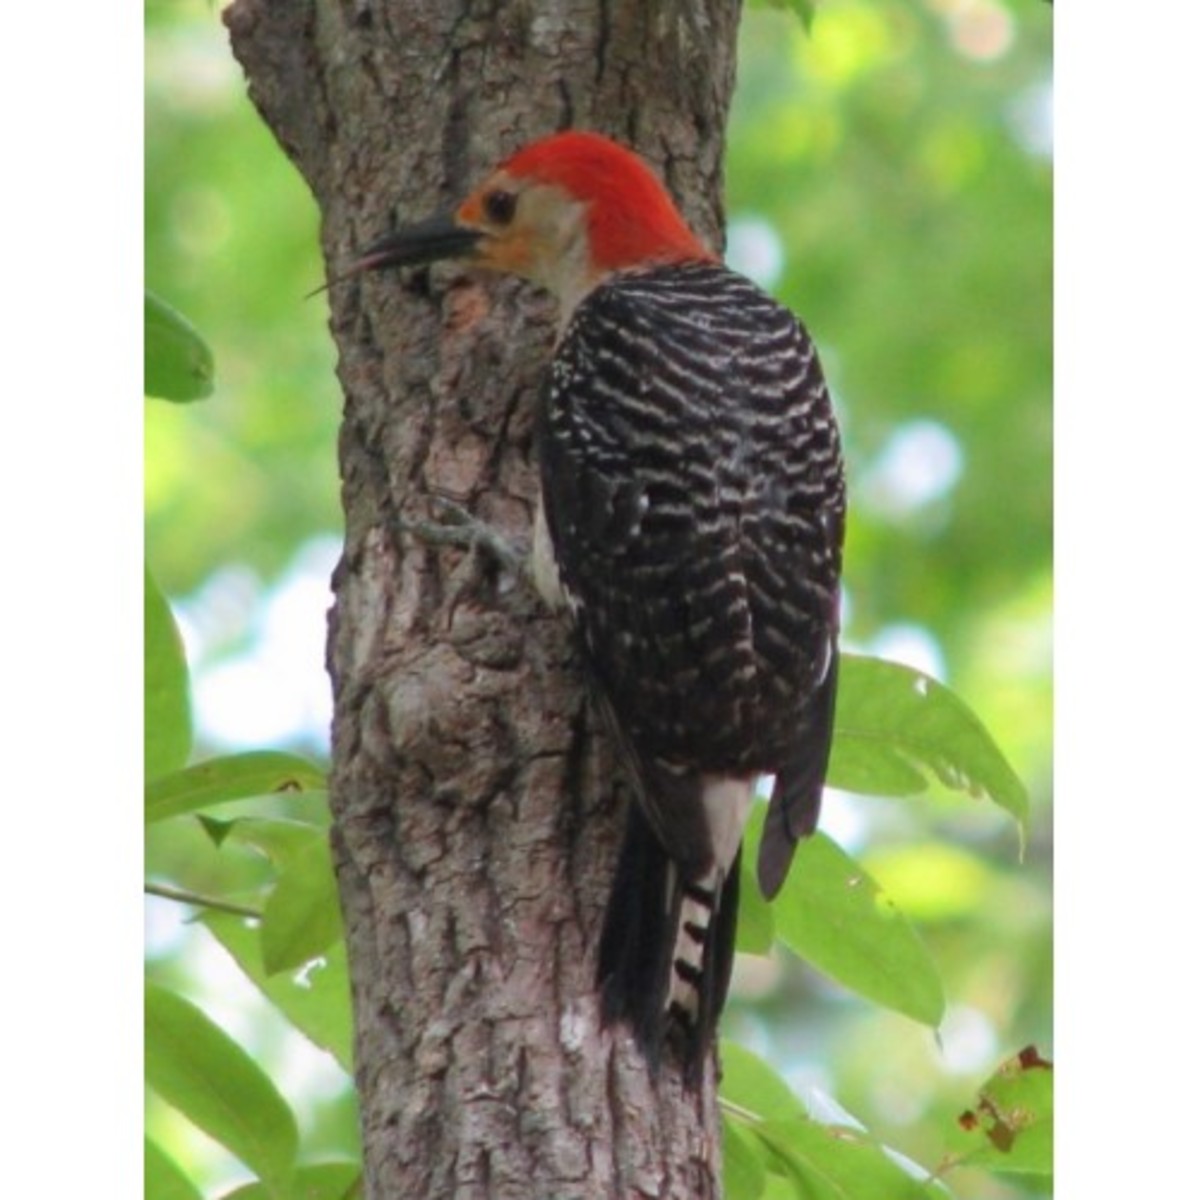 A woodpecker has a barbed tongue which it uses to hook insect larvae.